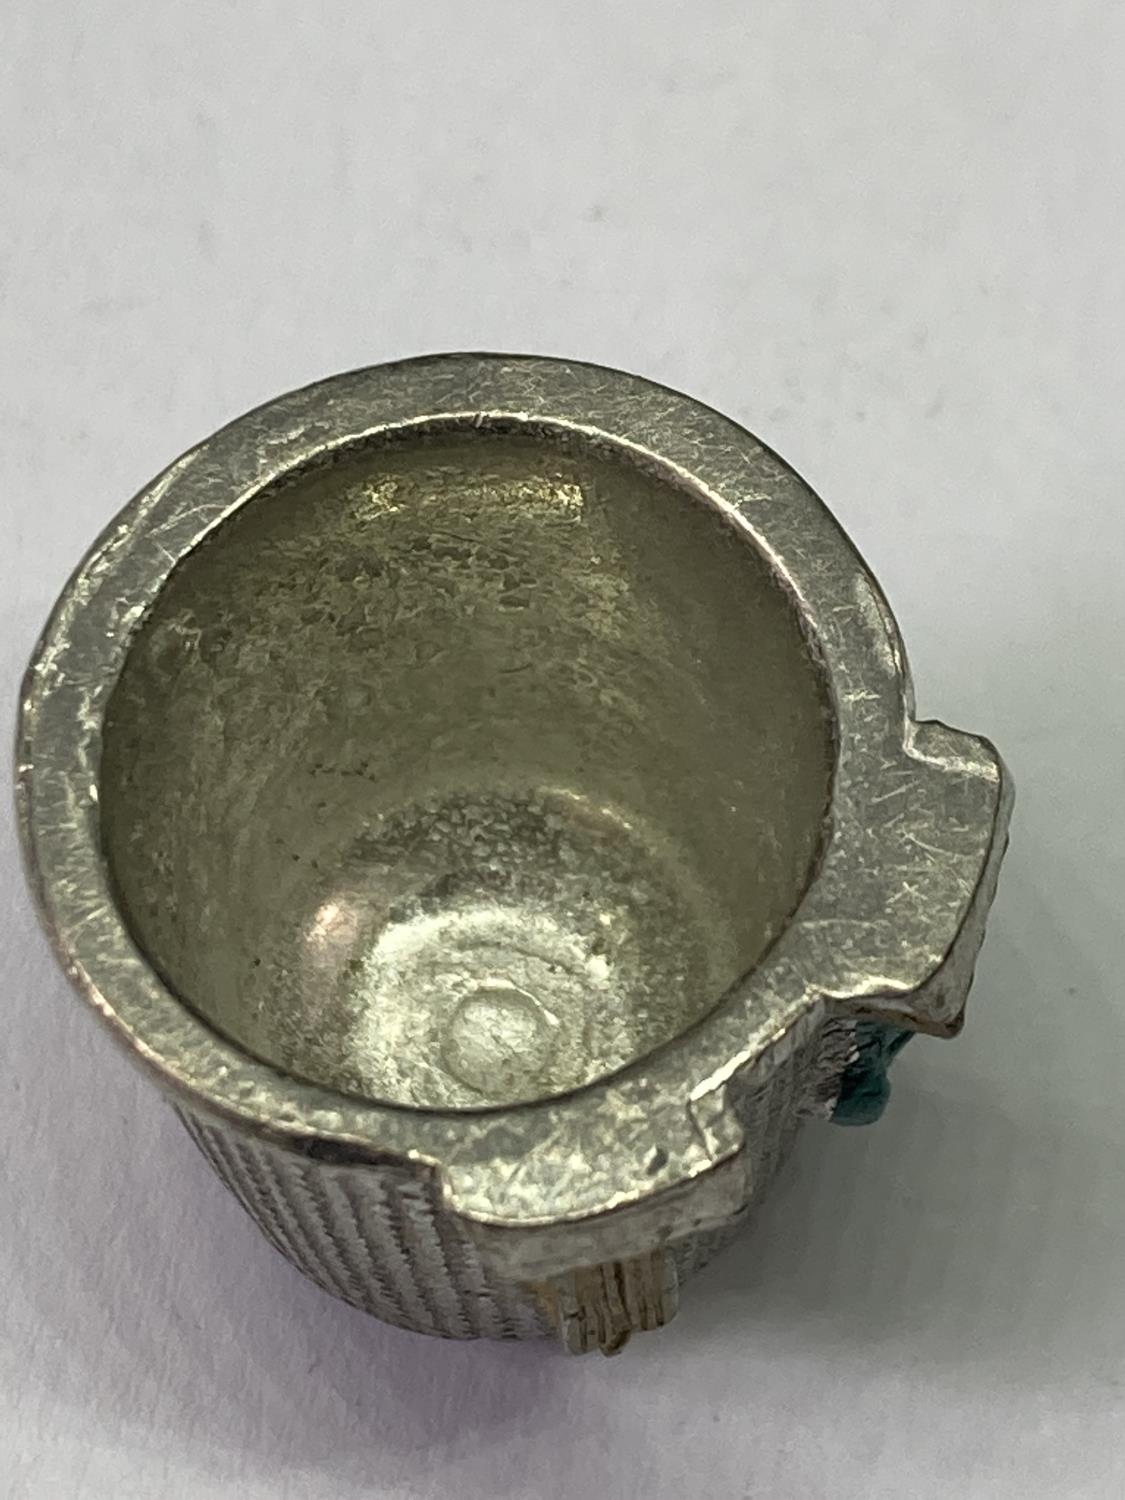 A VINTAGE PEWTER THIMBLE DEPICTING NEW YORK - Image 3 of 3